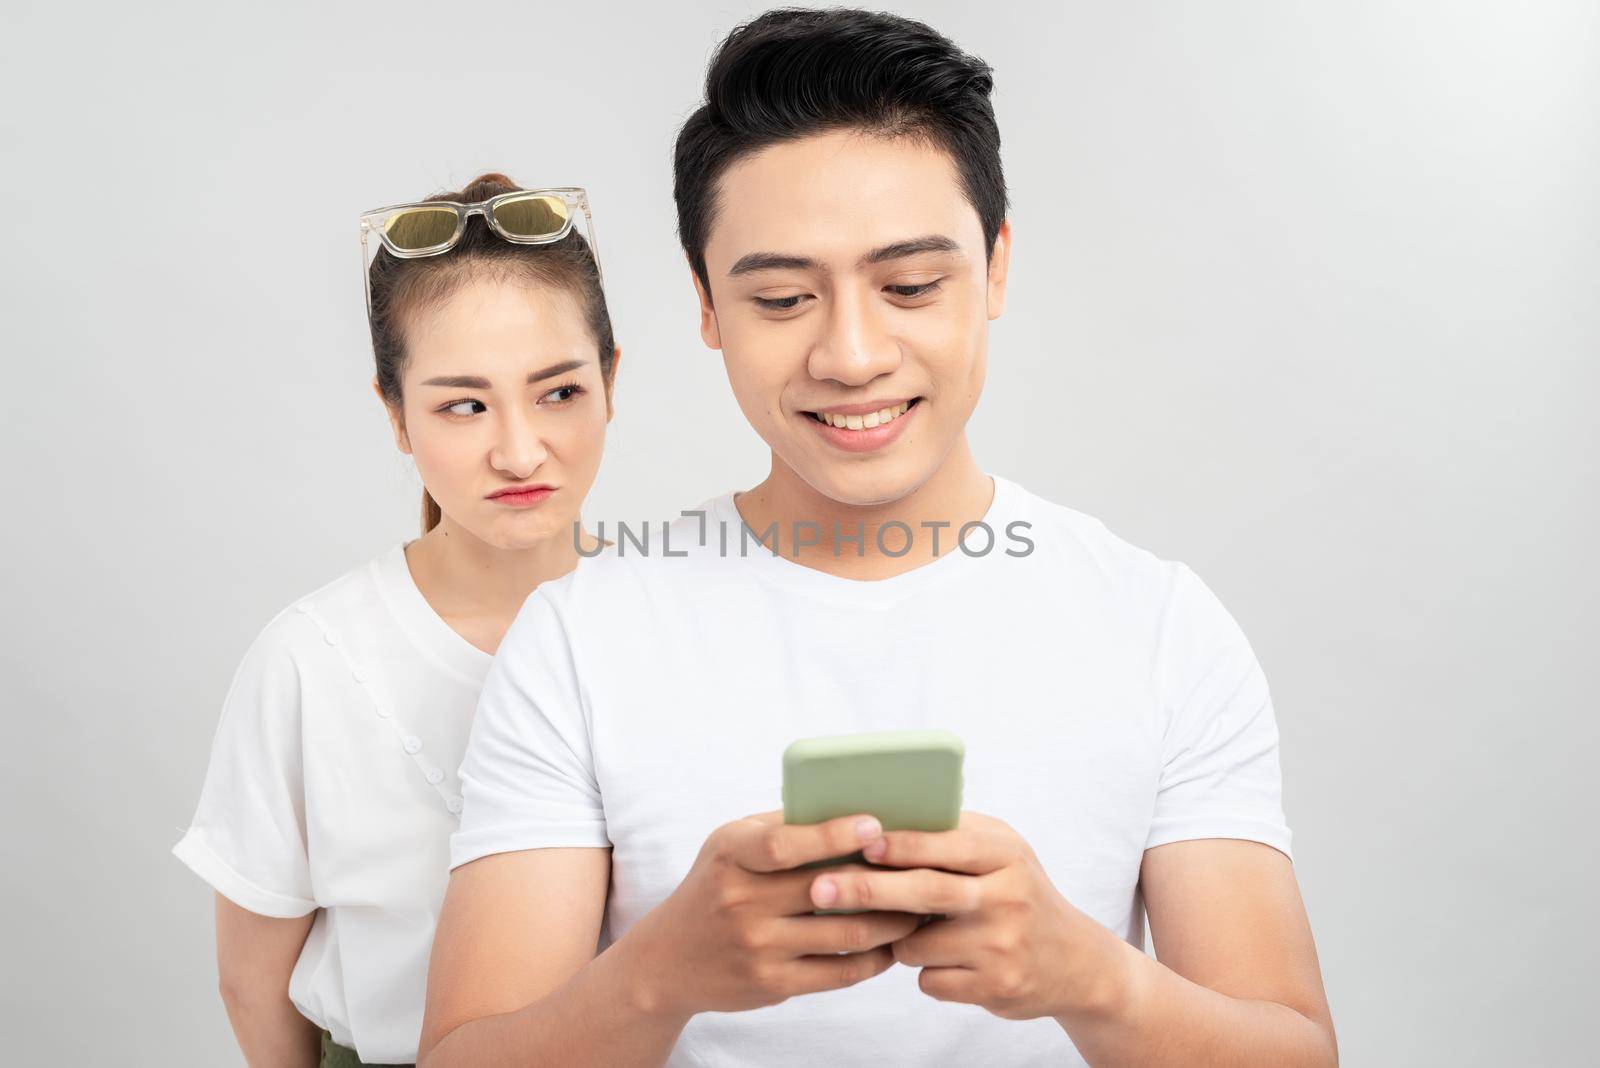 Cheater man dating online with a smart phone and girlfriend is spying on white background by makidotvn